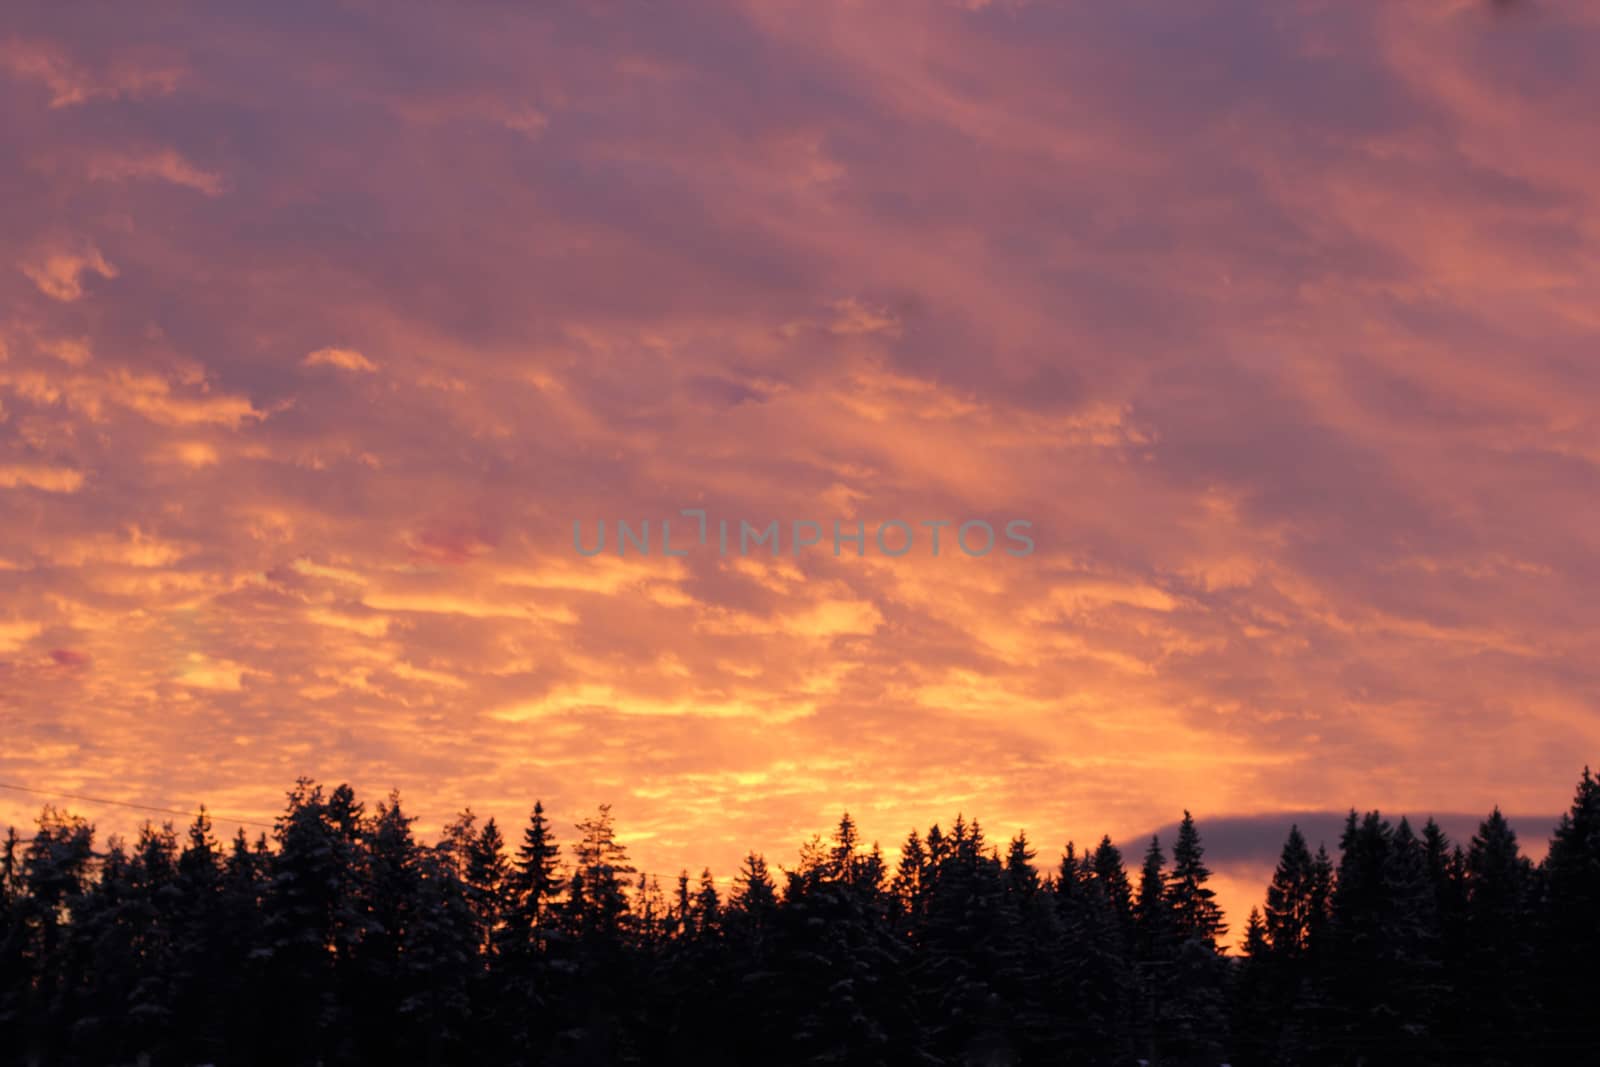 Pink sky over the firs by Metanna